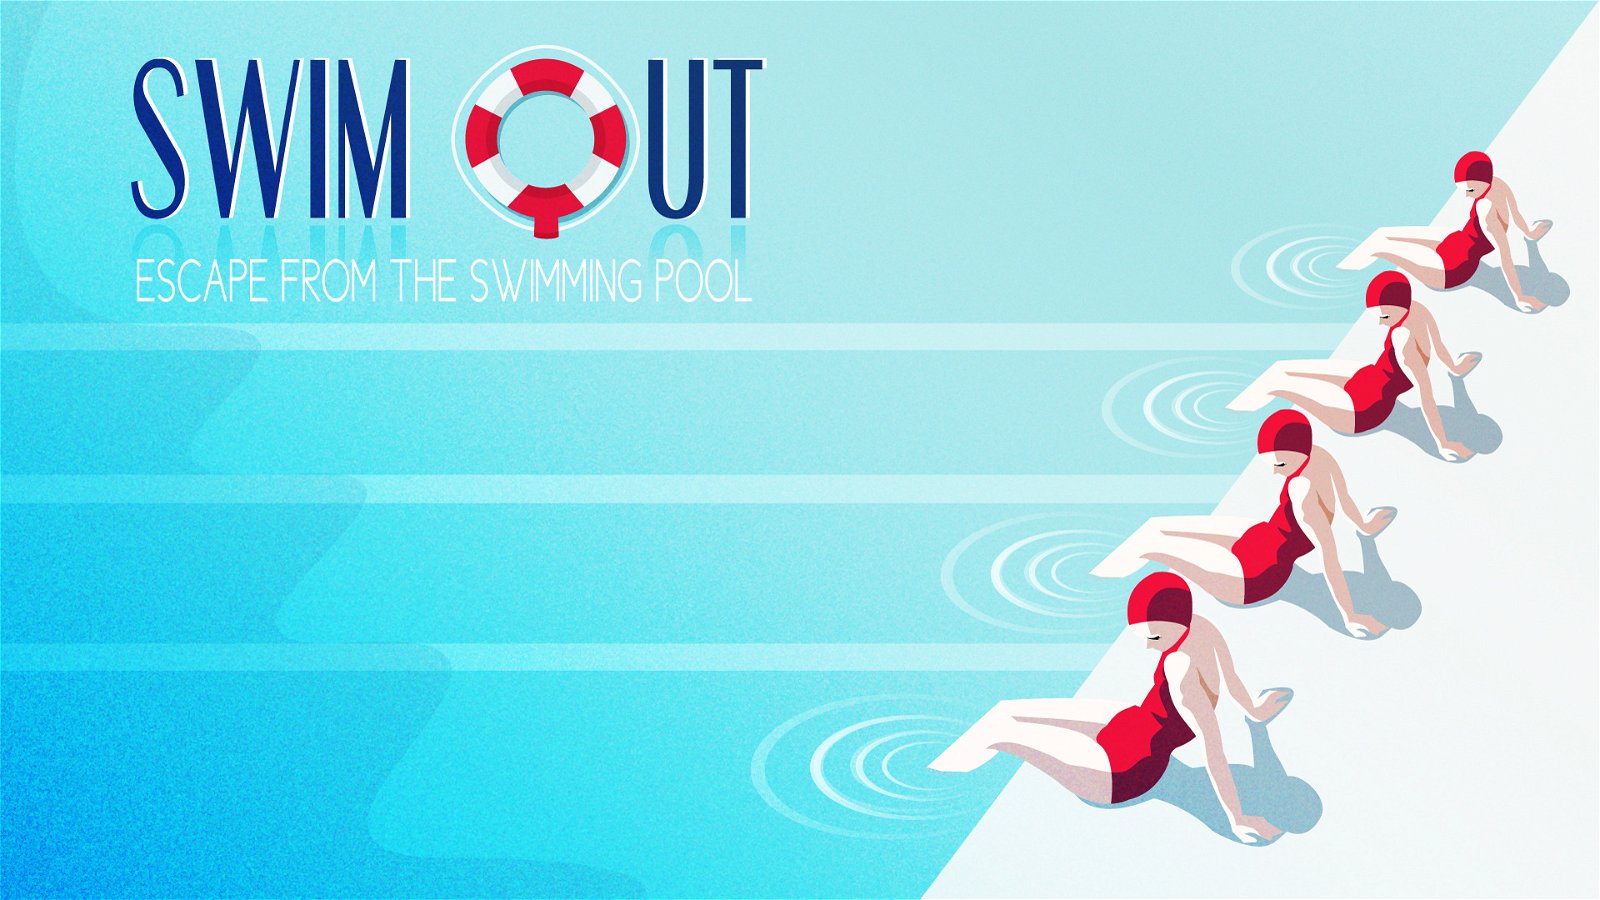 Image of Swim Out